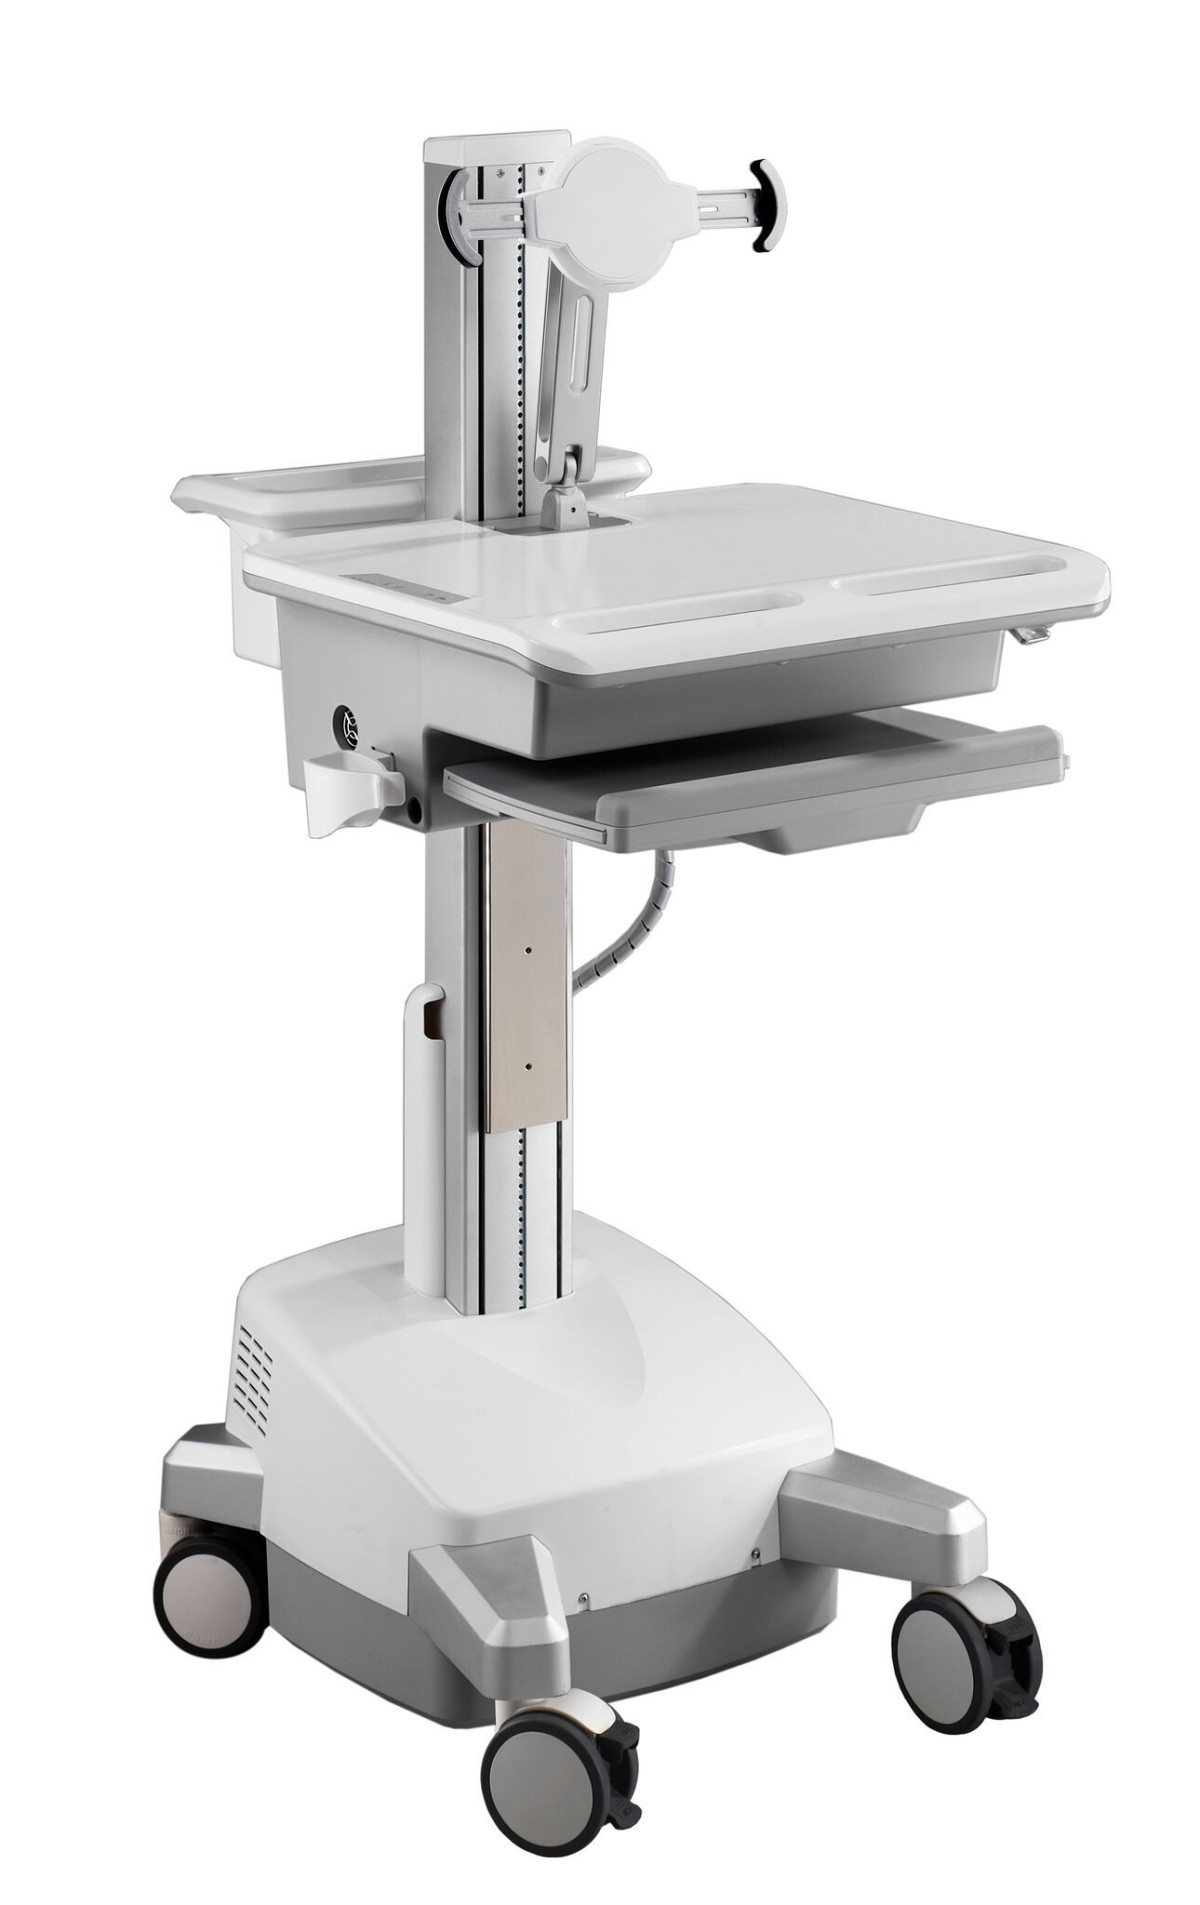 Aavara CMT01 Powered Mobile Medical Cart with Manual LIFT - Tablet type